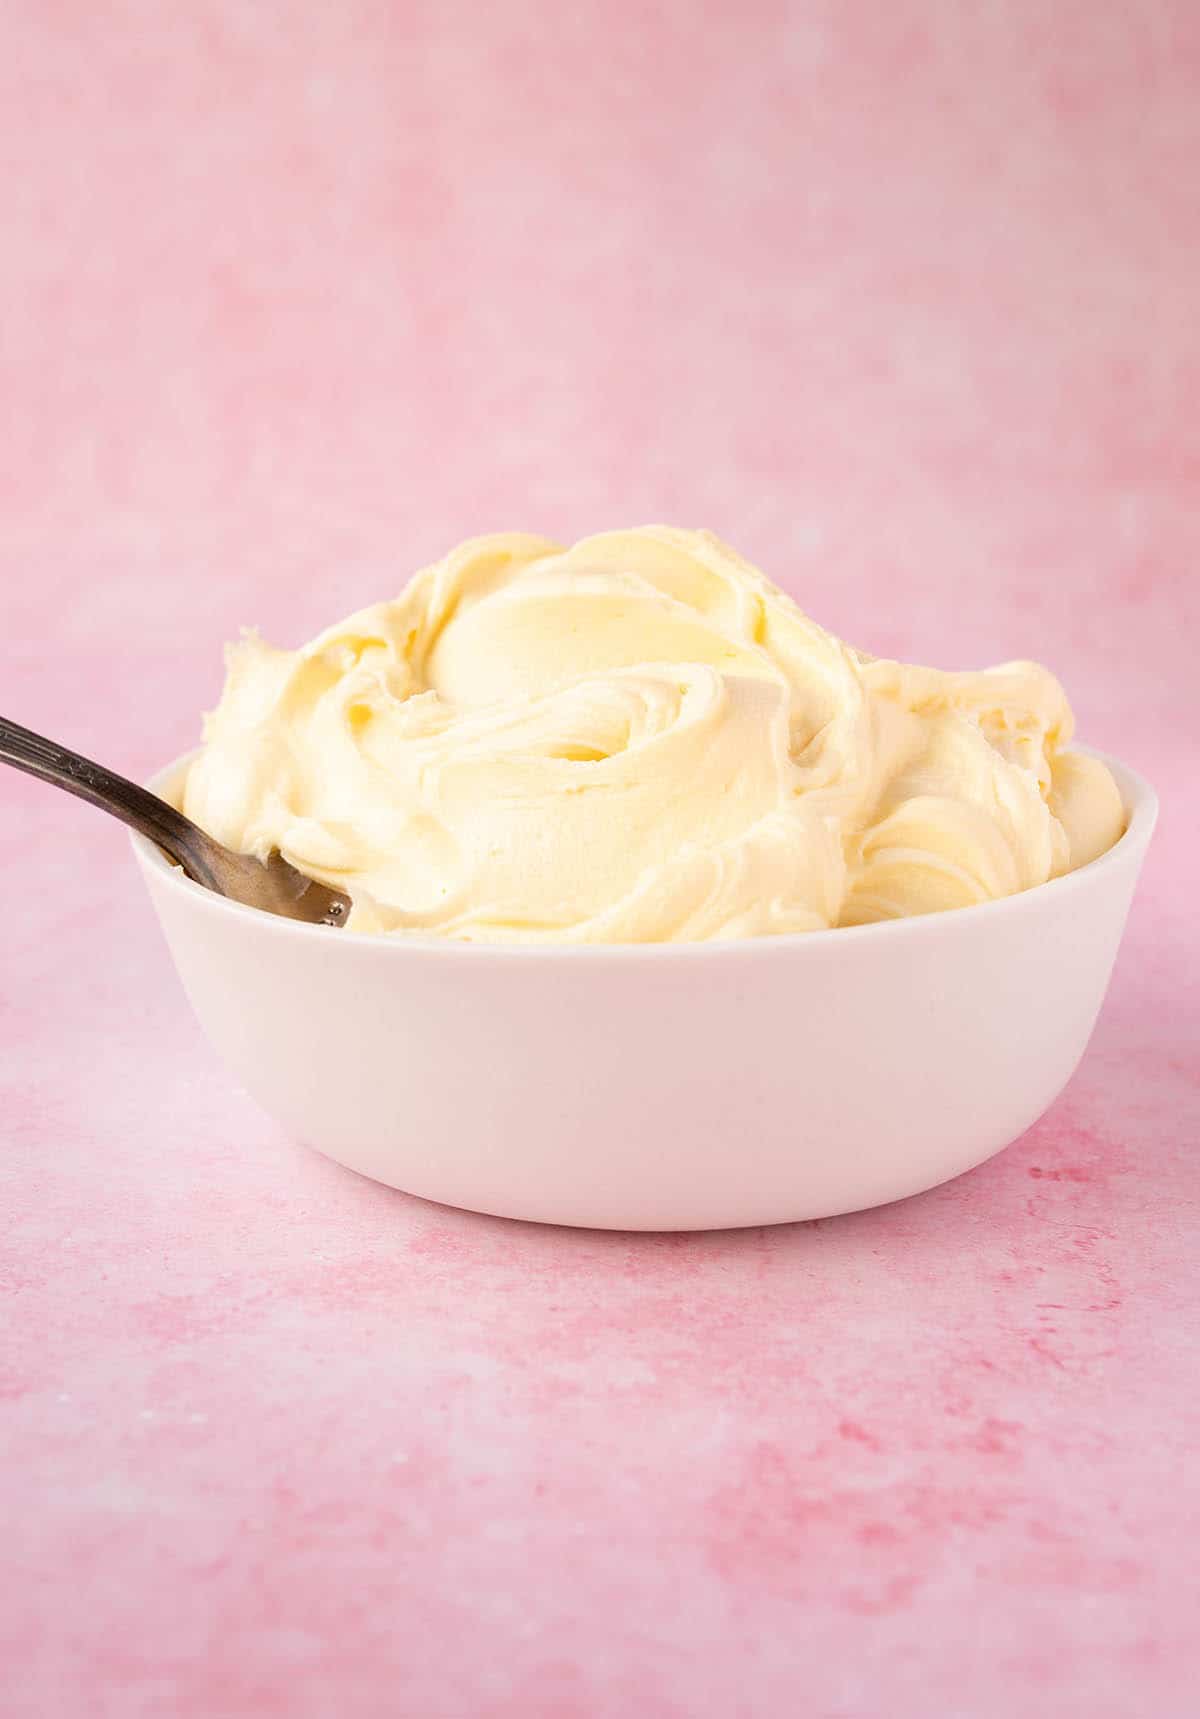 A white bowl filled with white chocolate buttercream on a pink background.